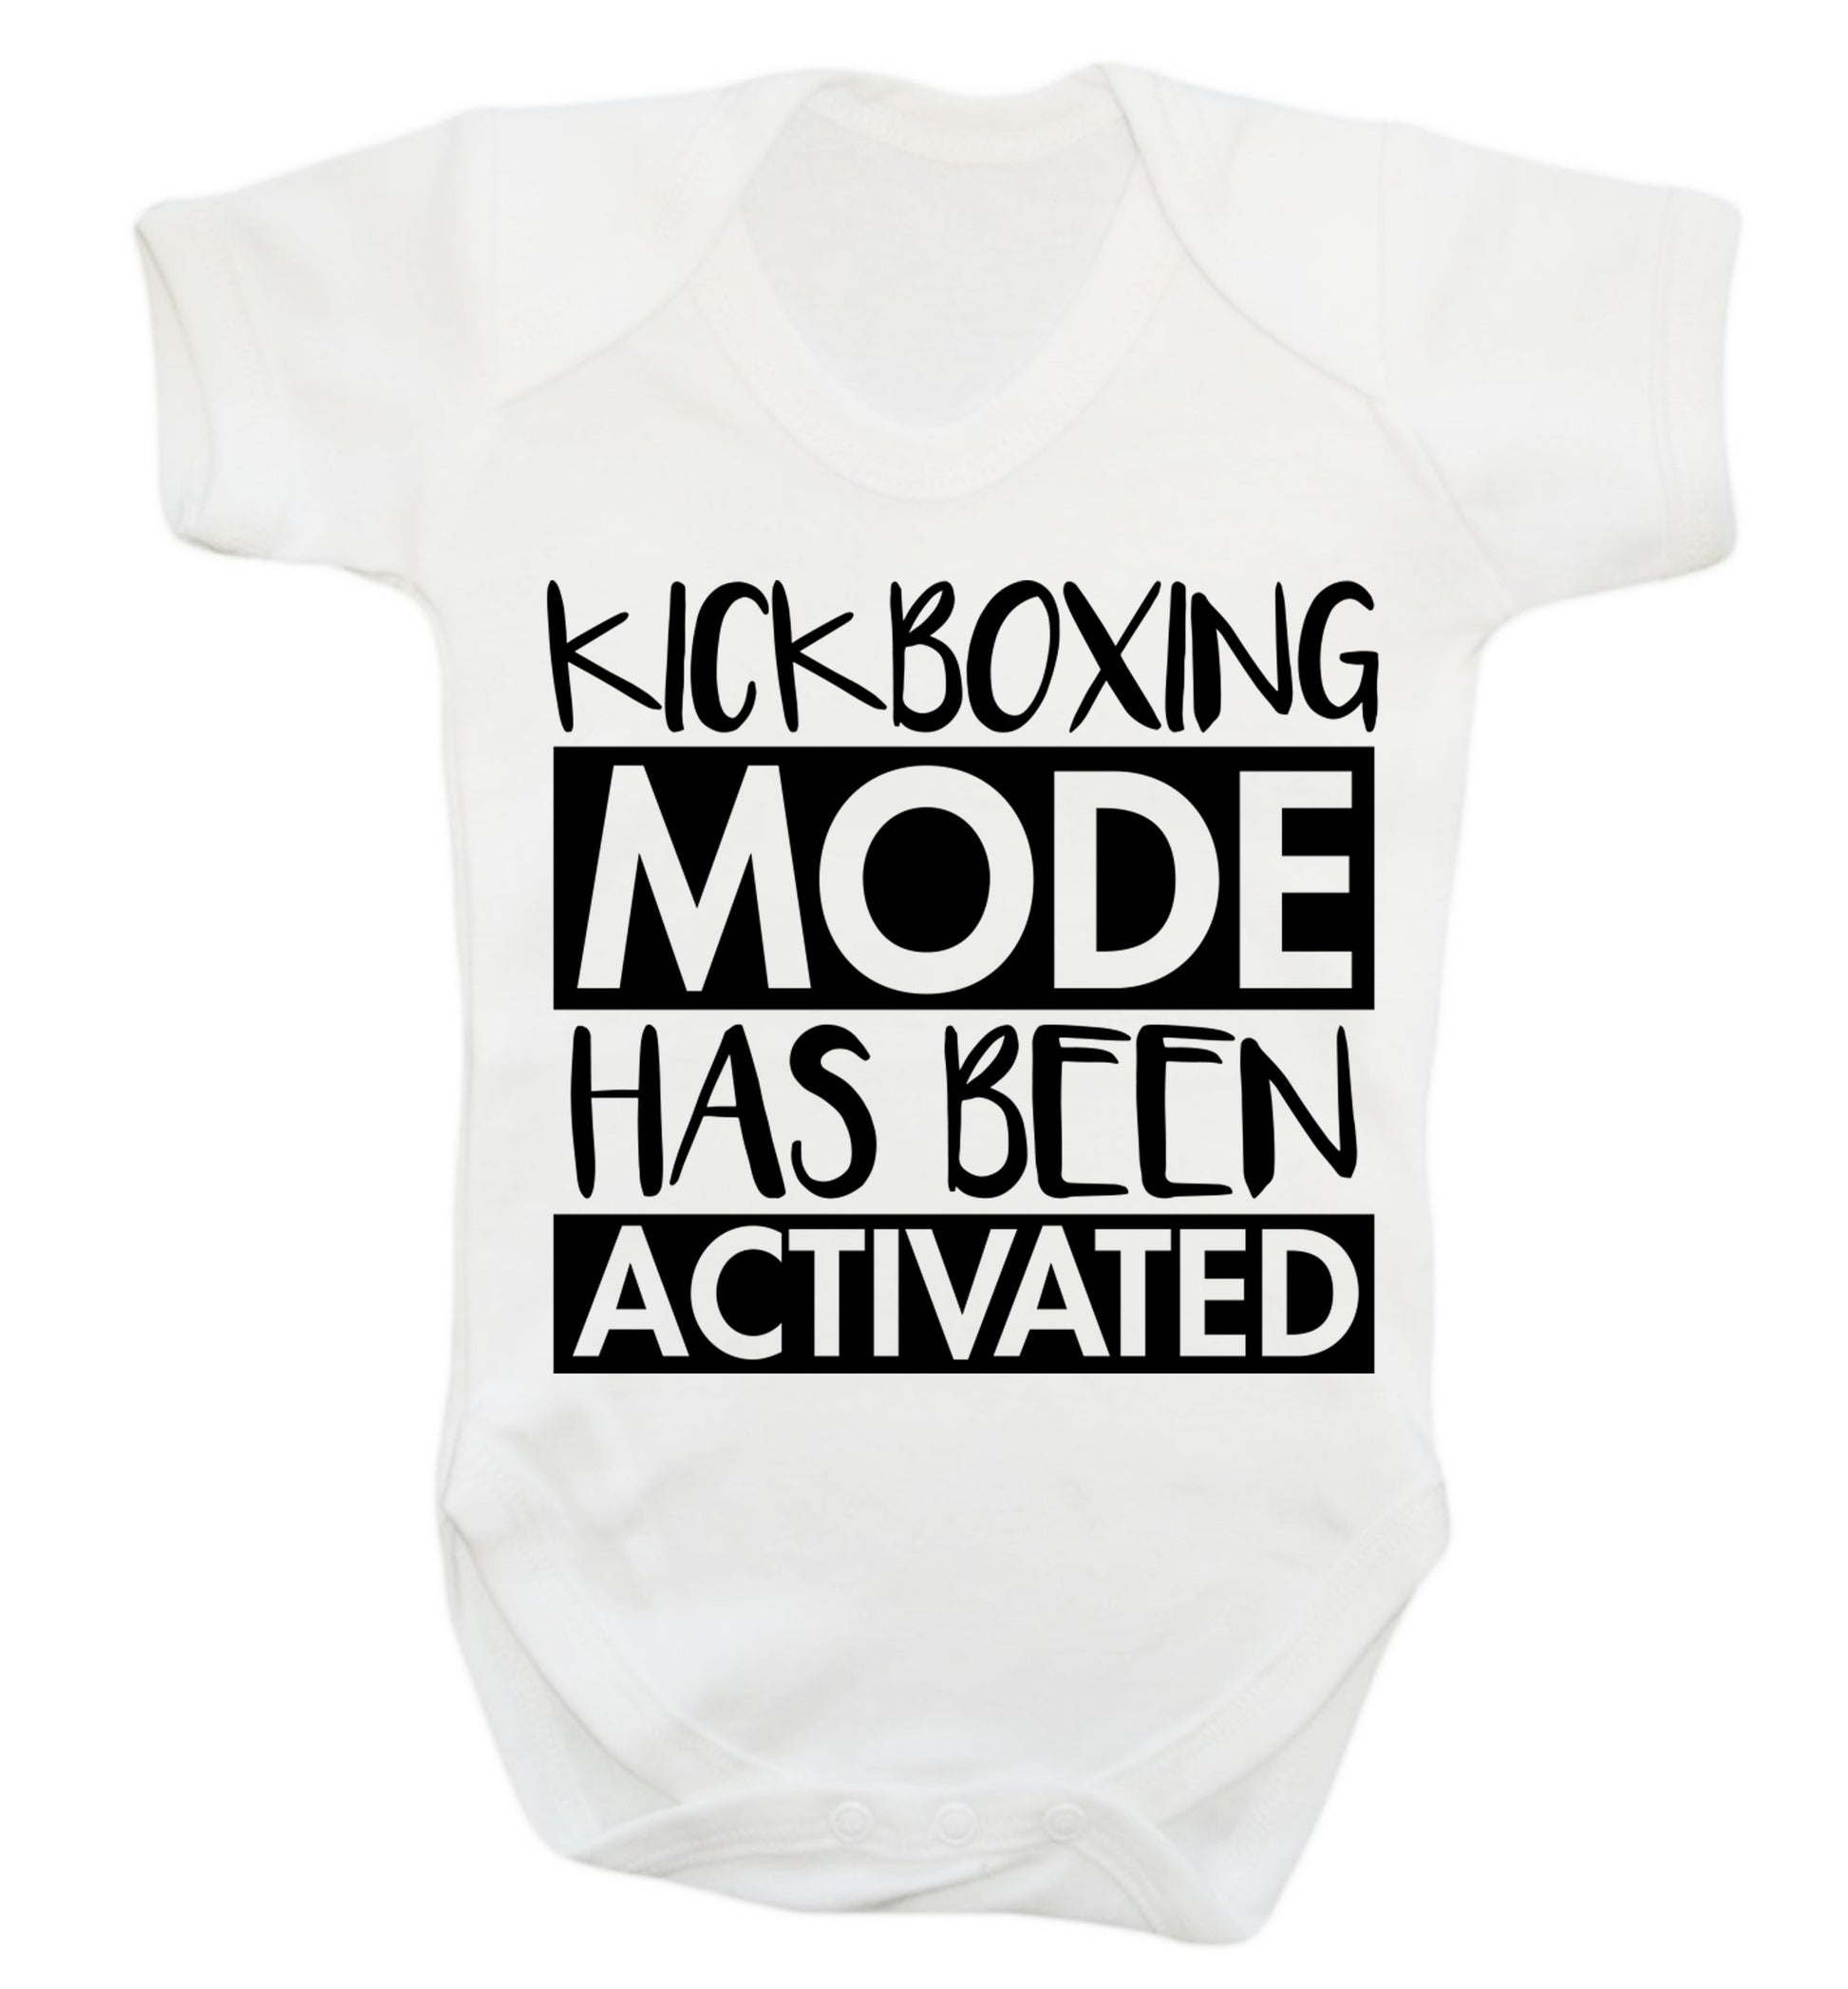 Kickboxing mode activated Baby Vest white 18-24 months